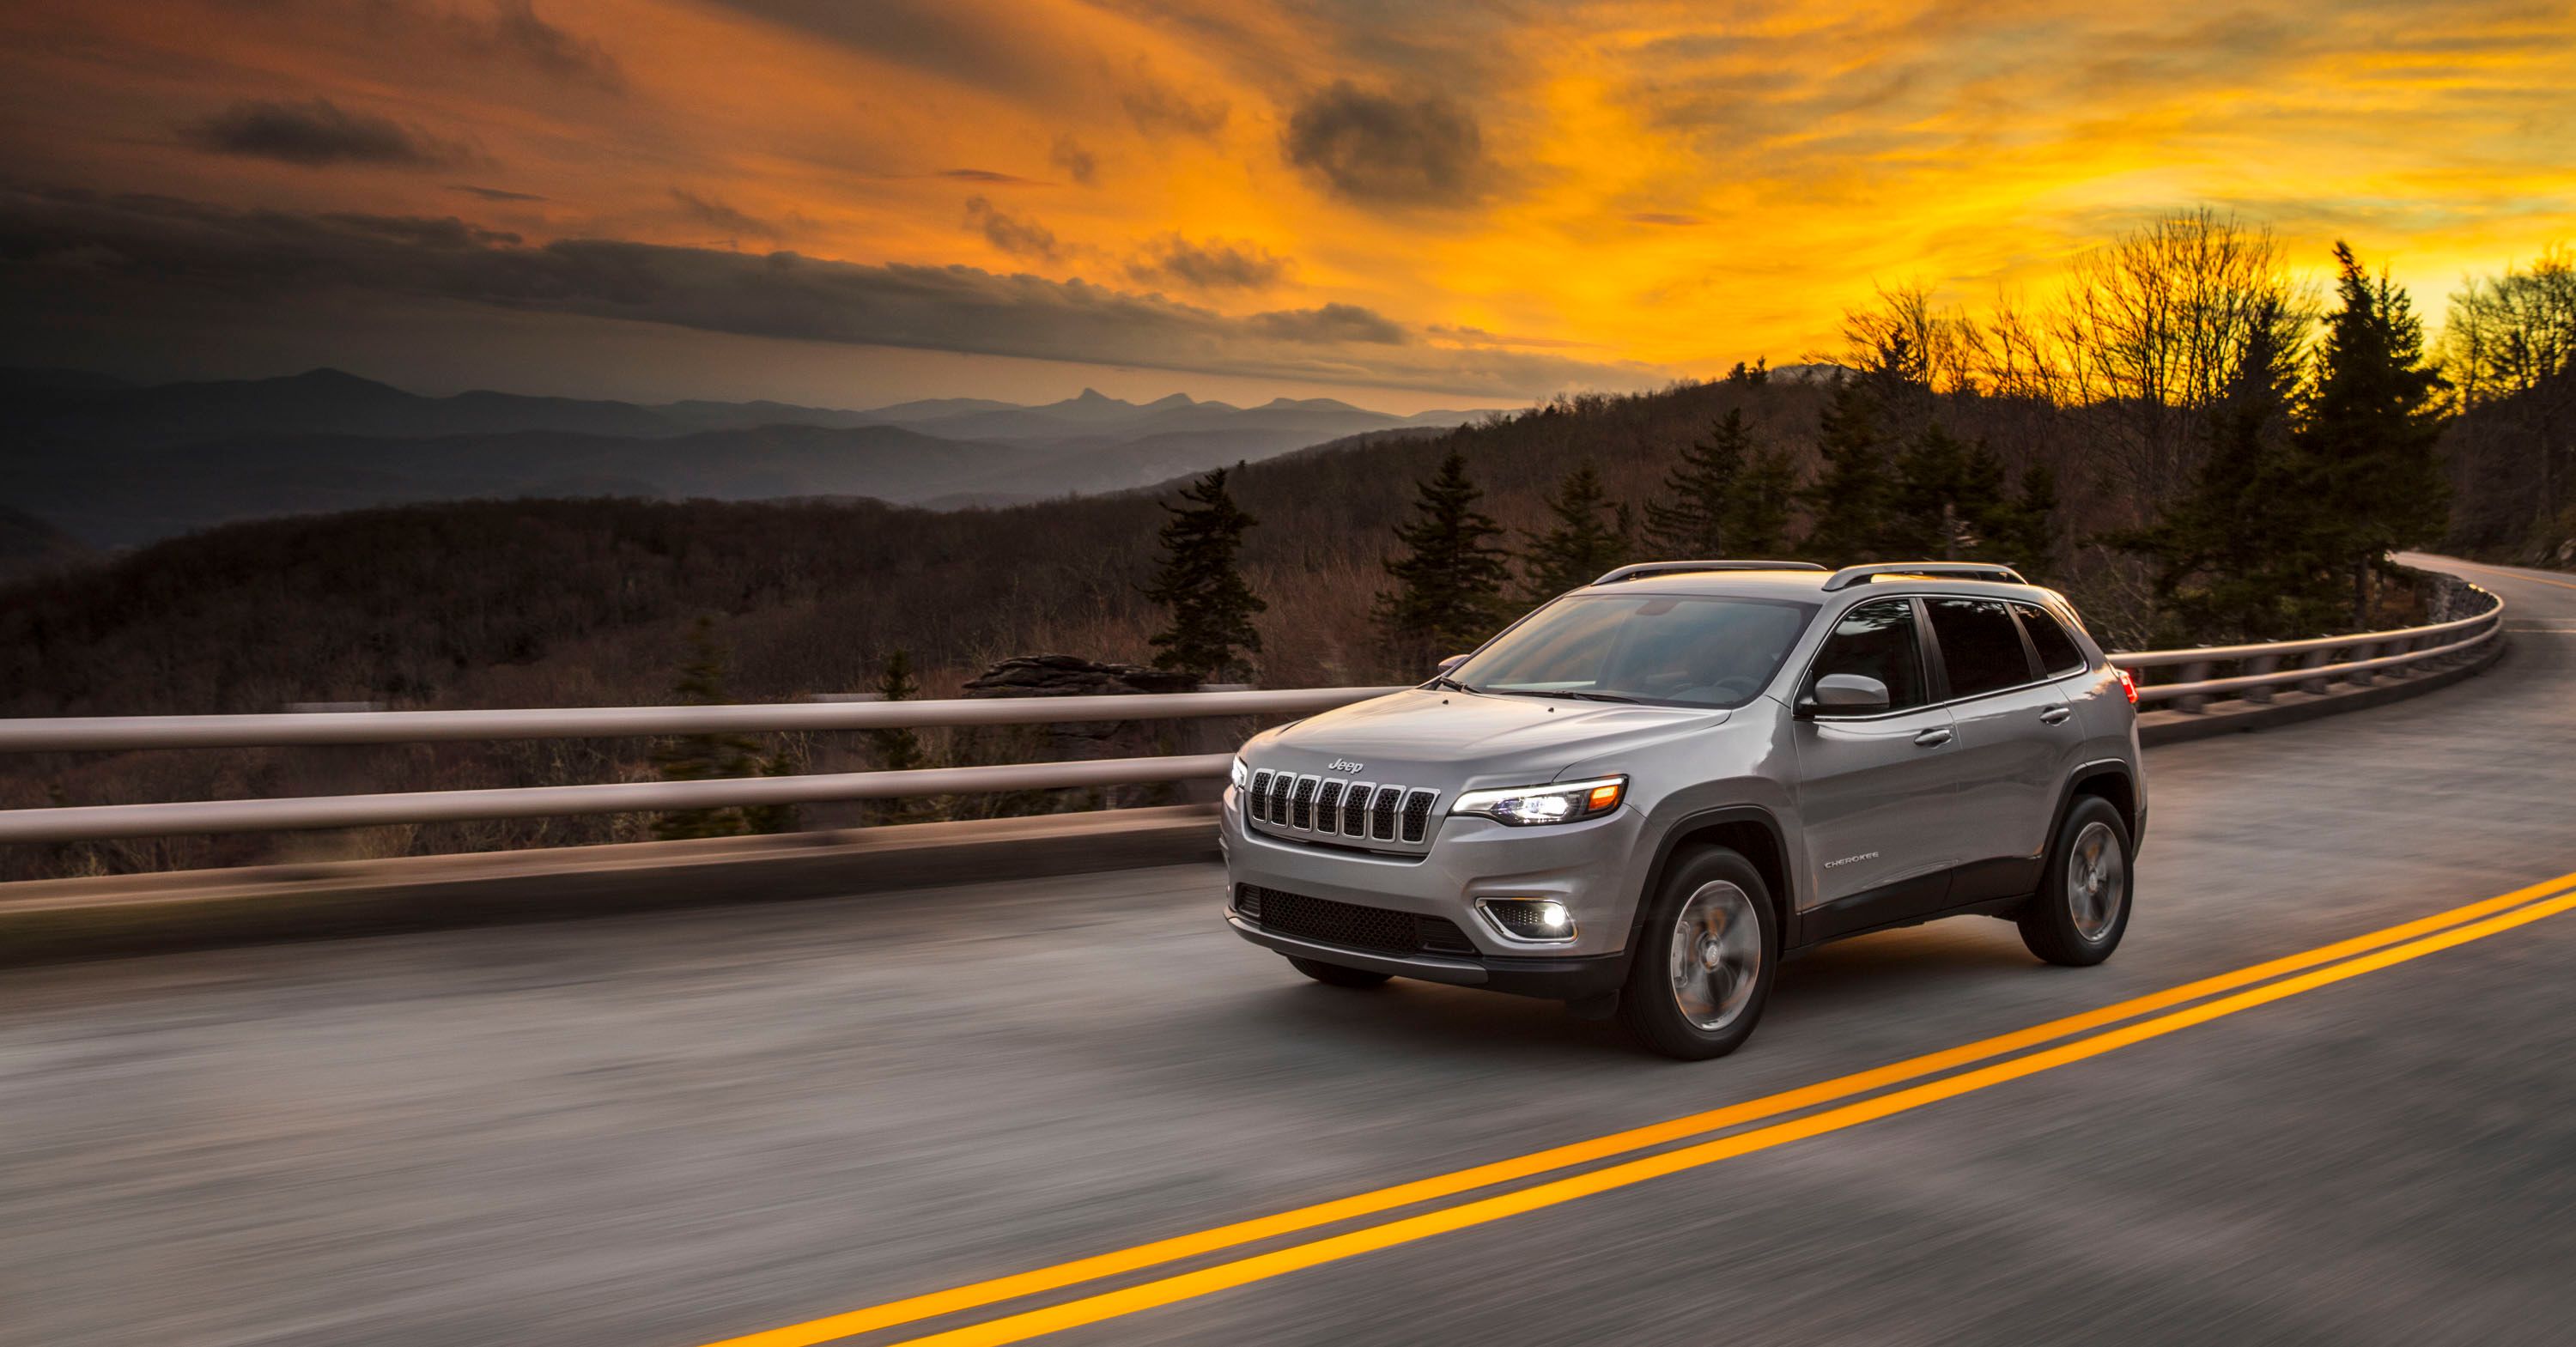 2019 2019 Jeep Cherokee Coming to Detroit